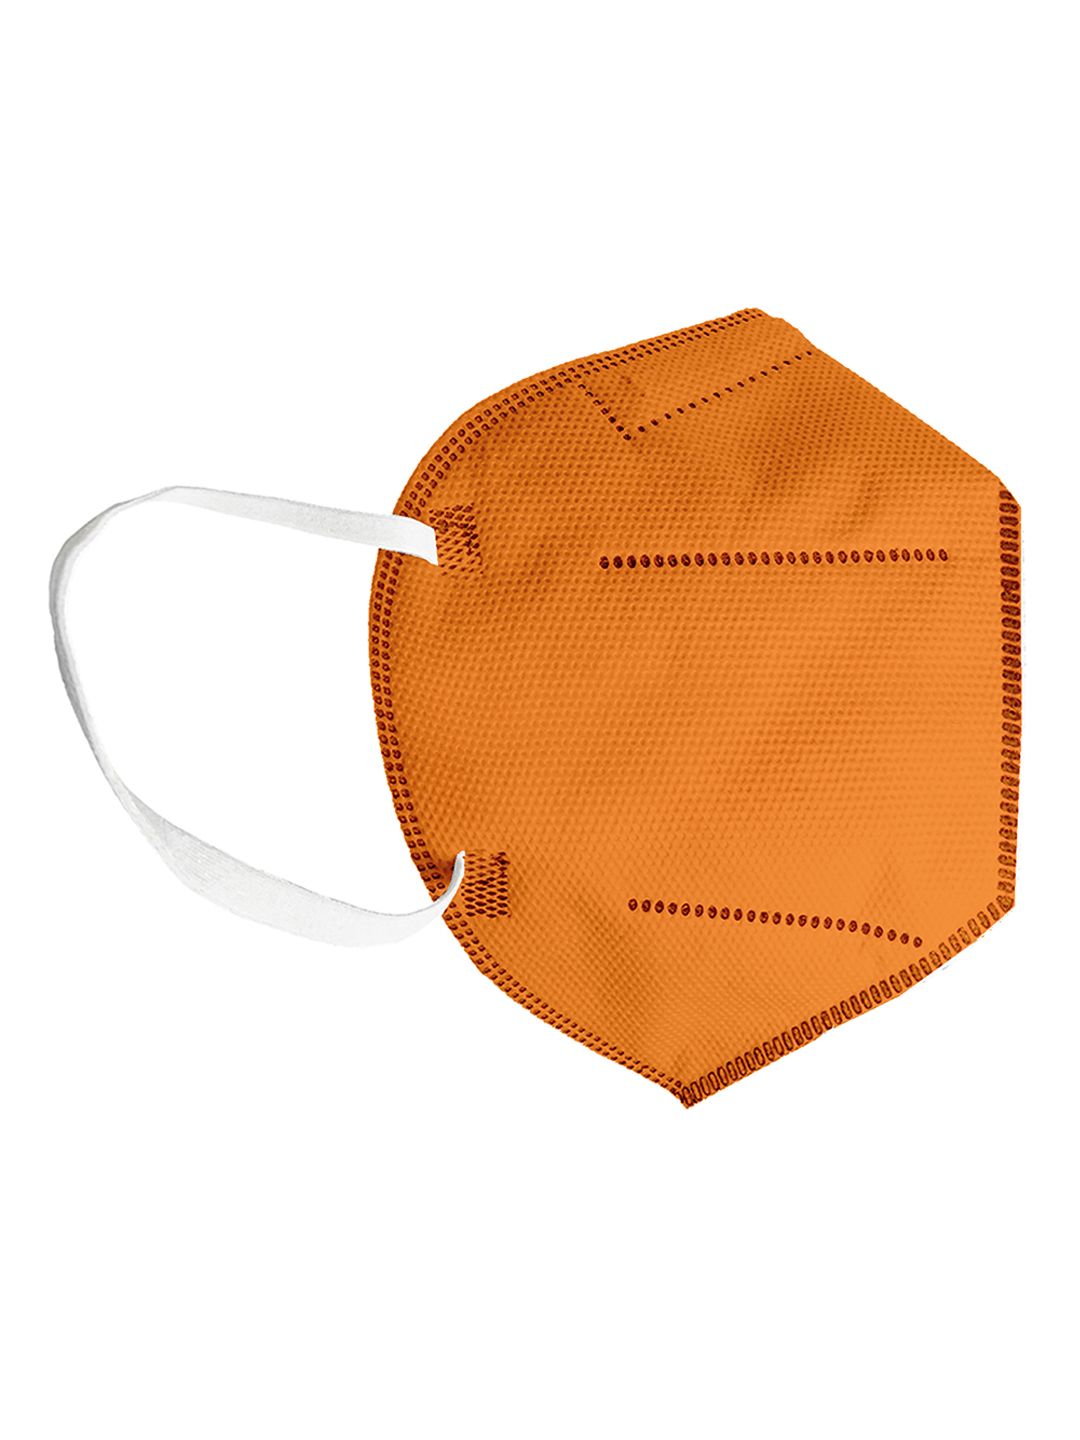 Status Unisex Mustard Yellow Solid Reusable 4-Ply Protective Outdoor N95 Mask Price in India